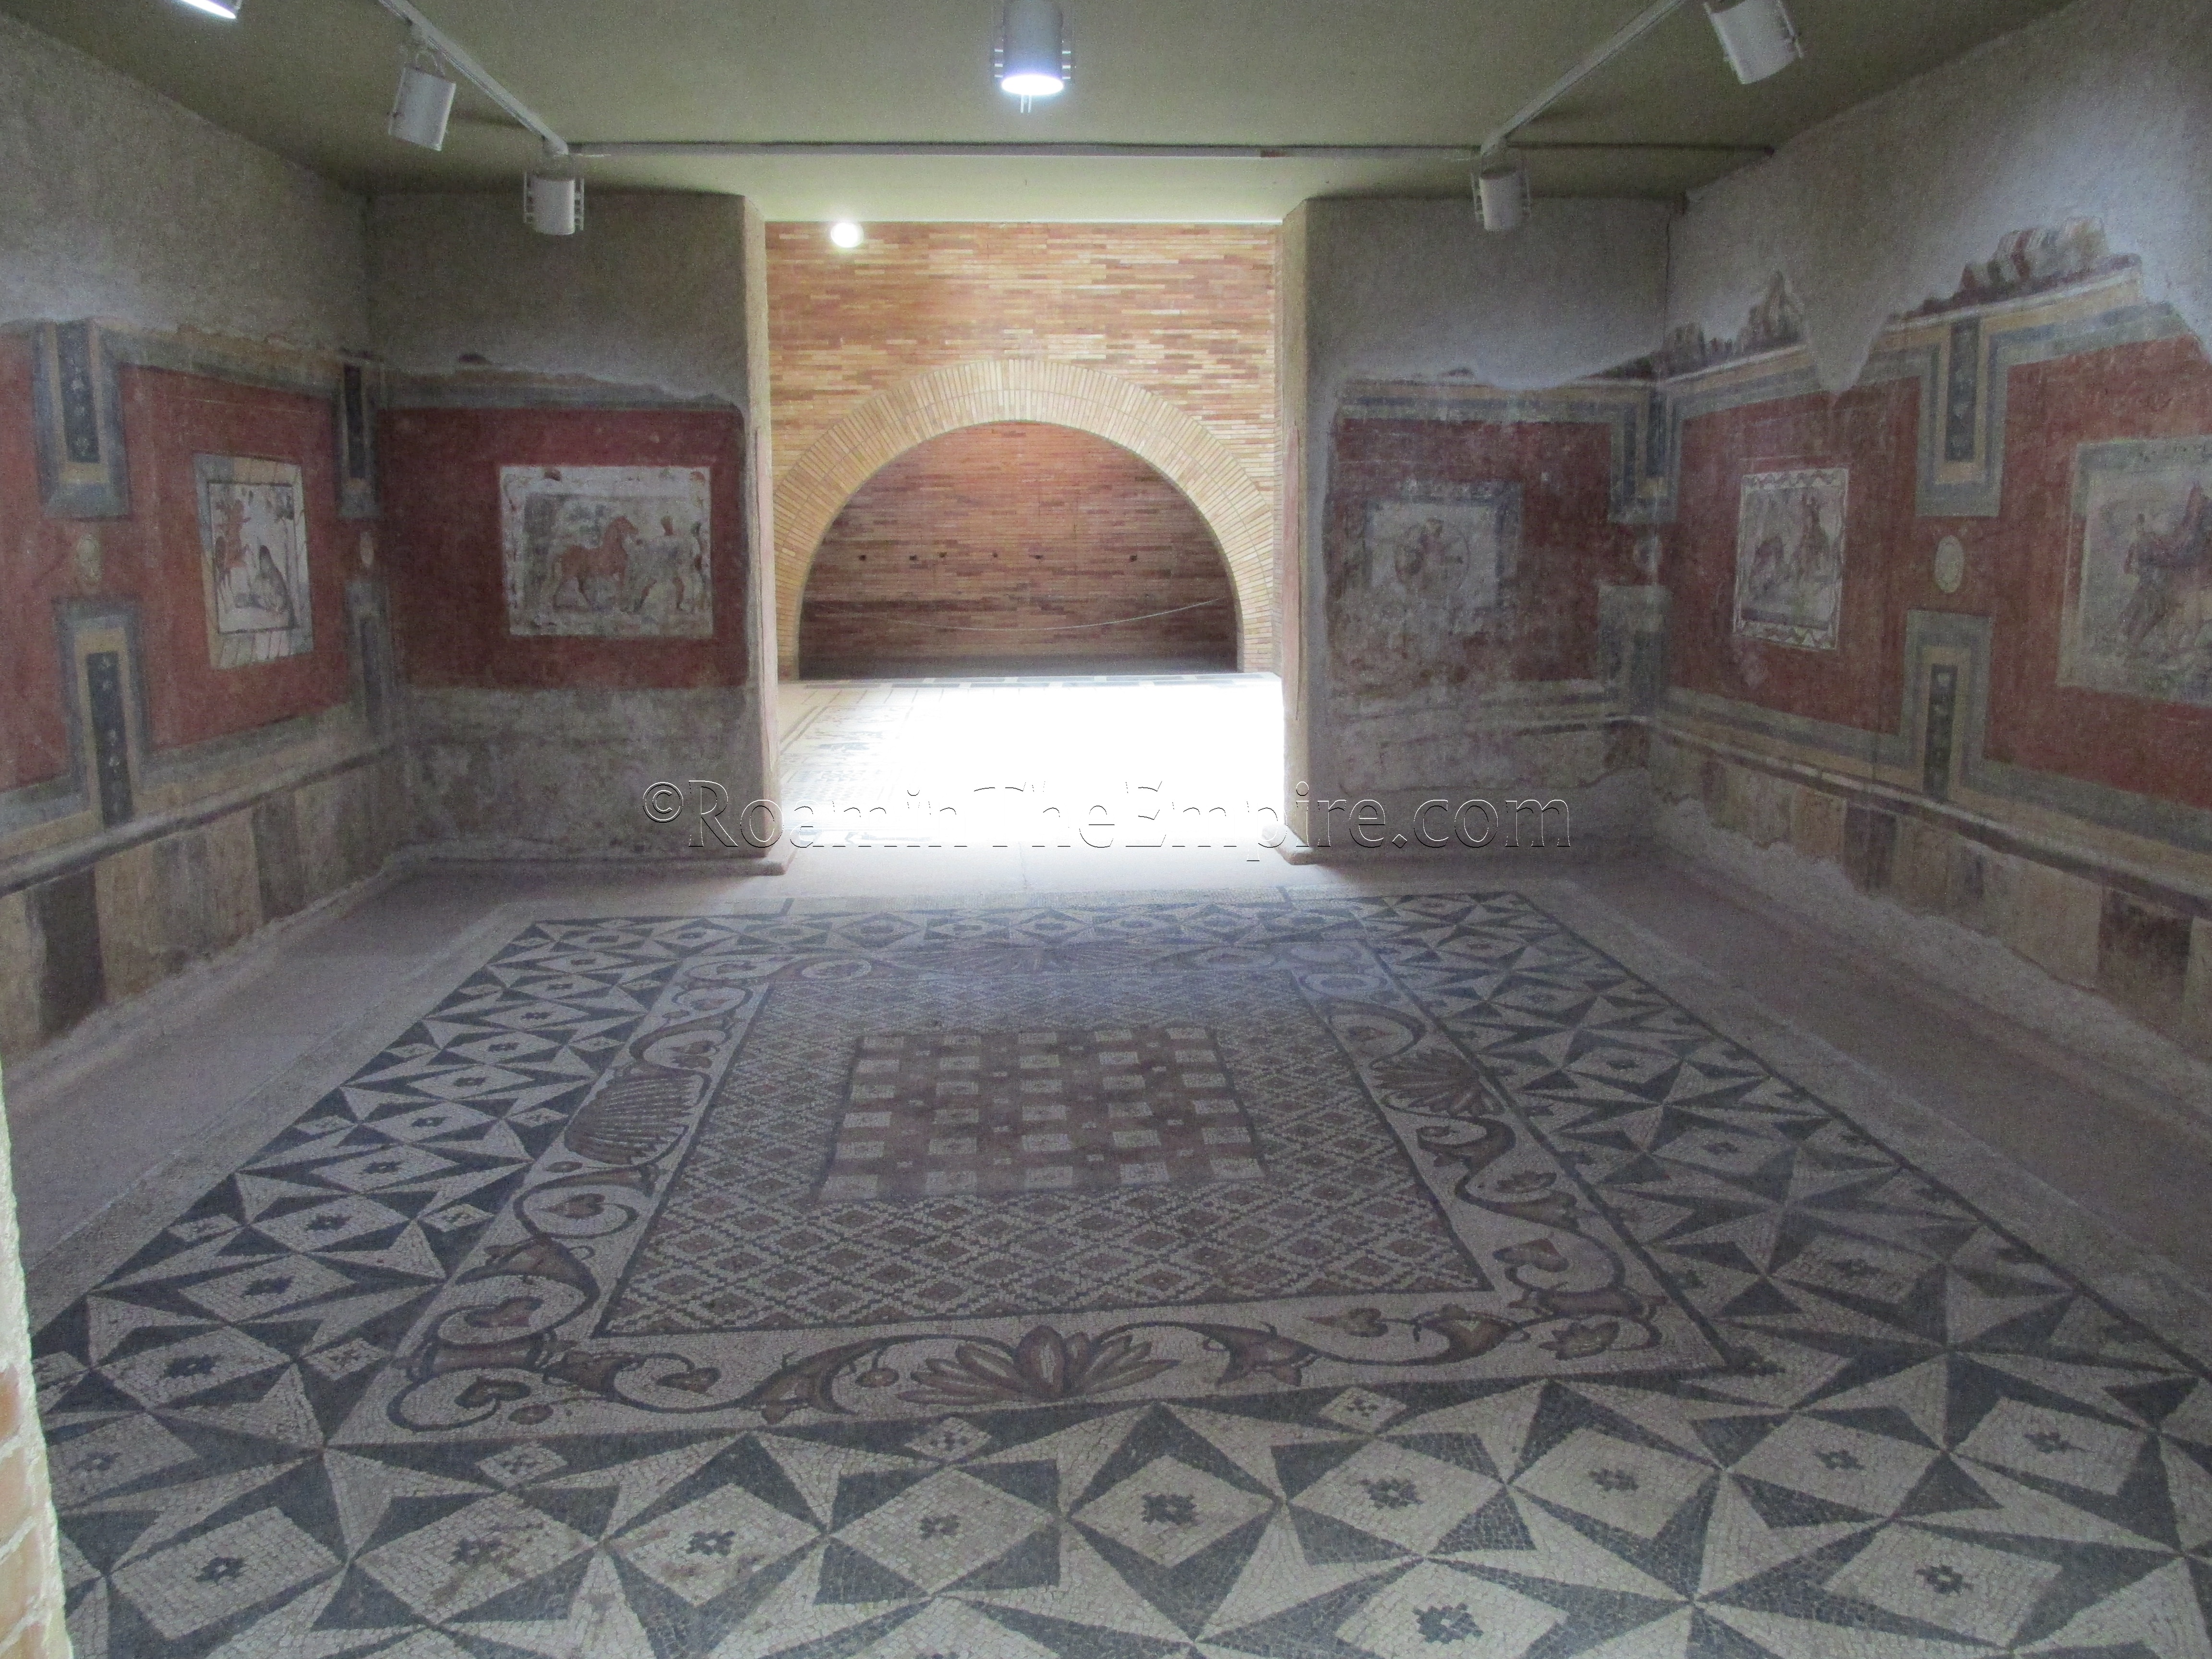 Recreation of a room with wall paintings and mosaic from the 4th century CE. Augusta Emerita.